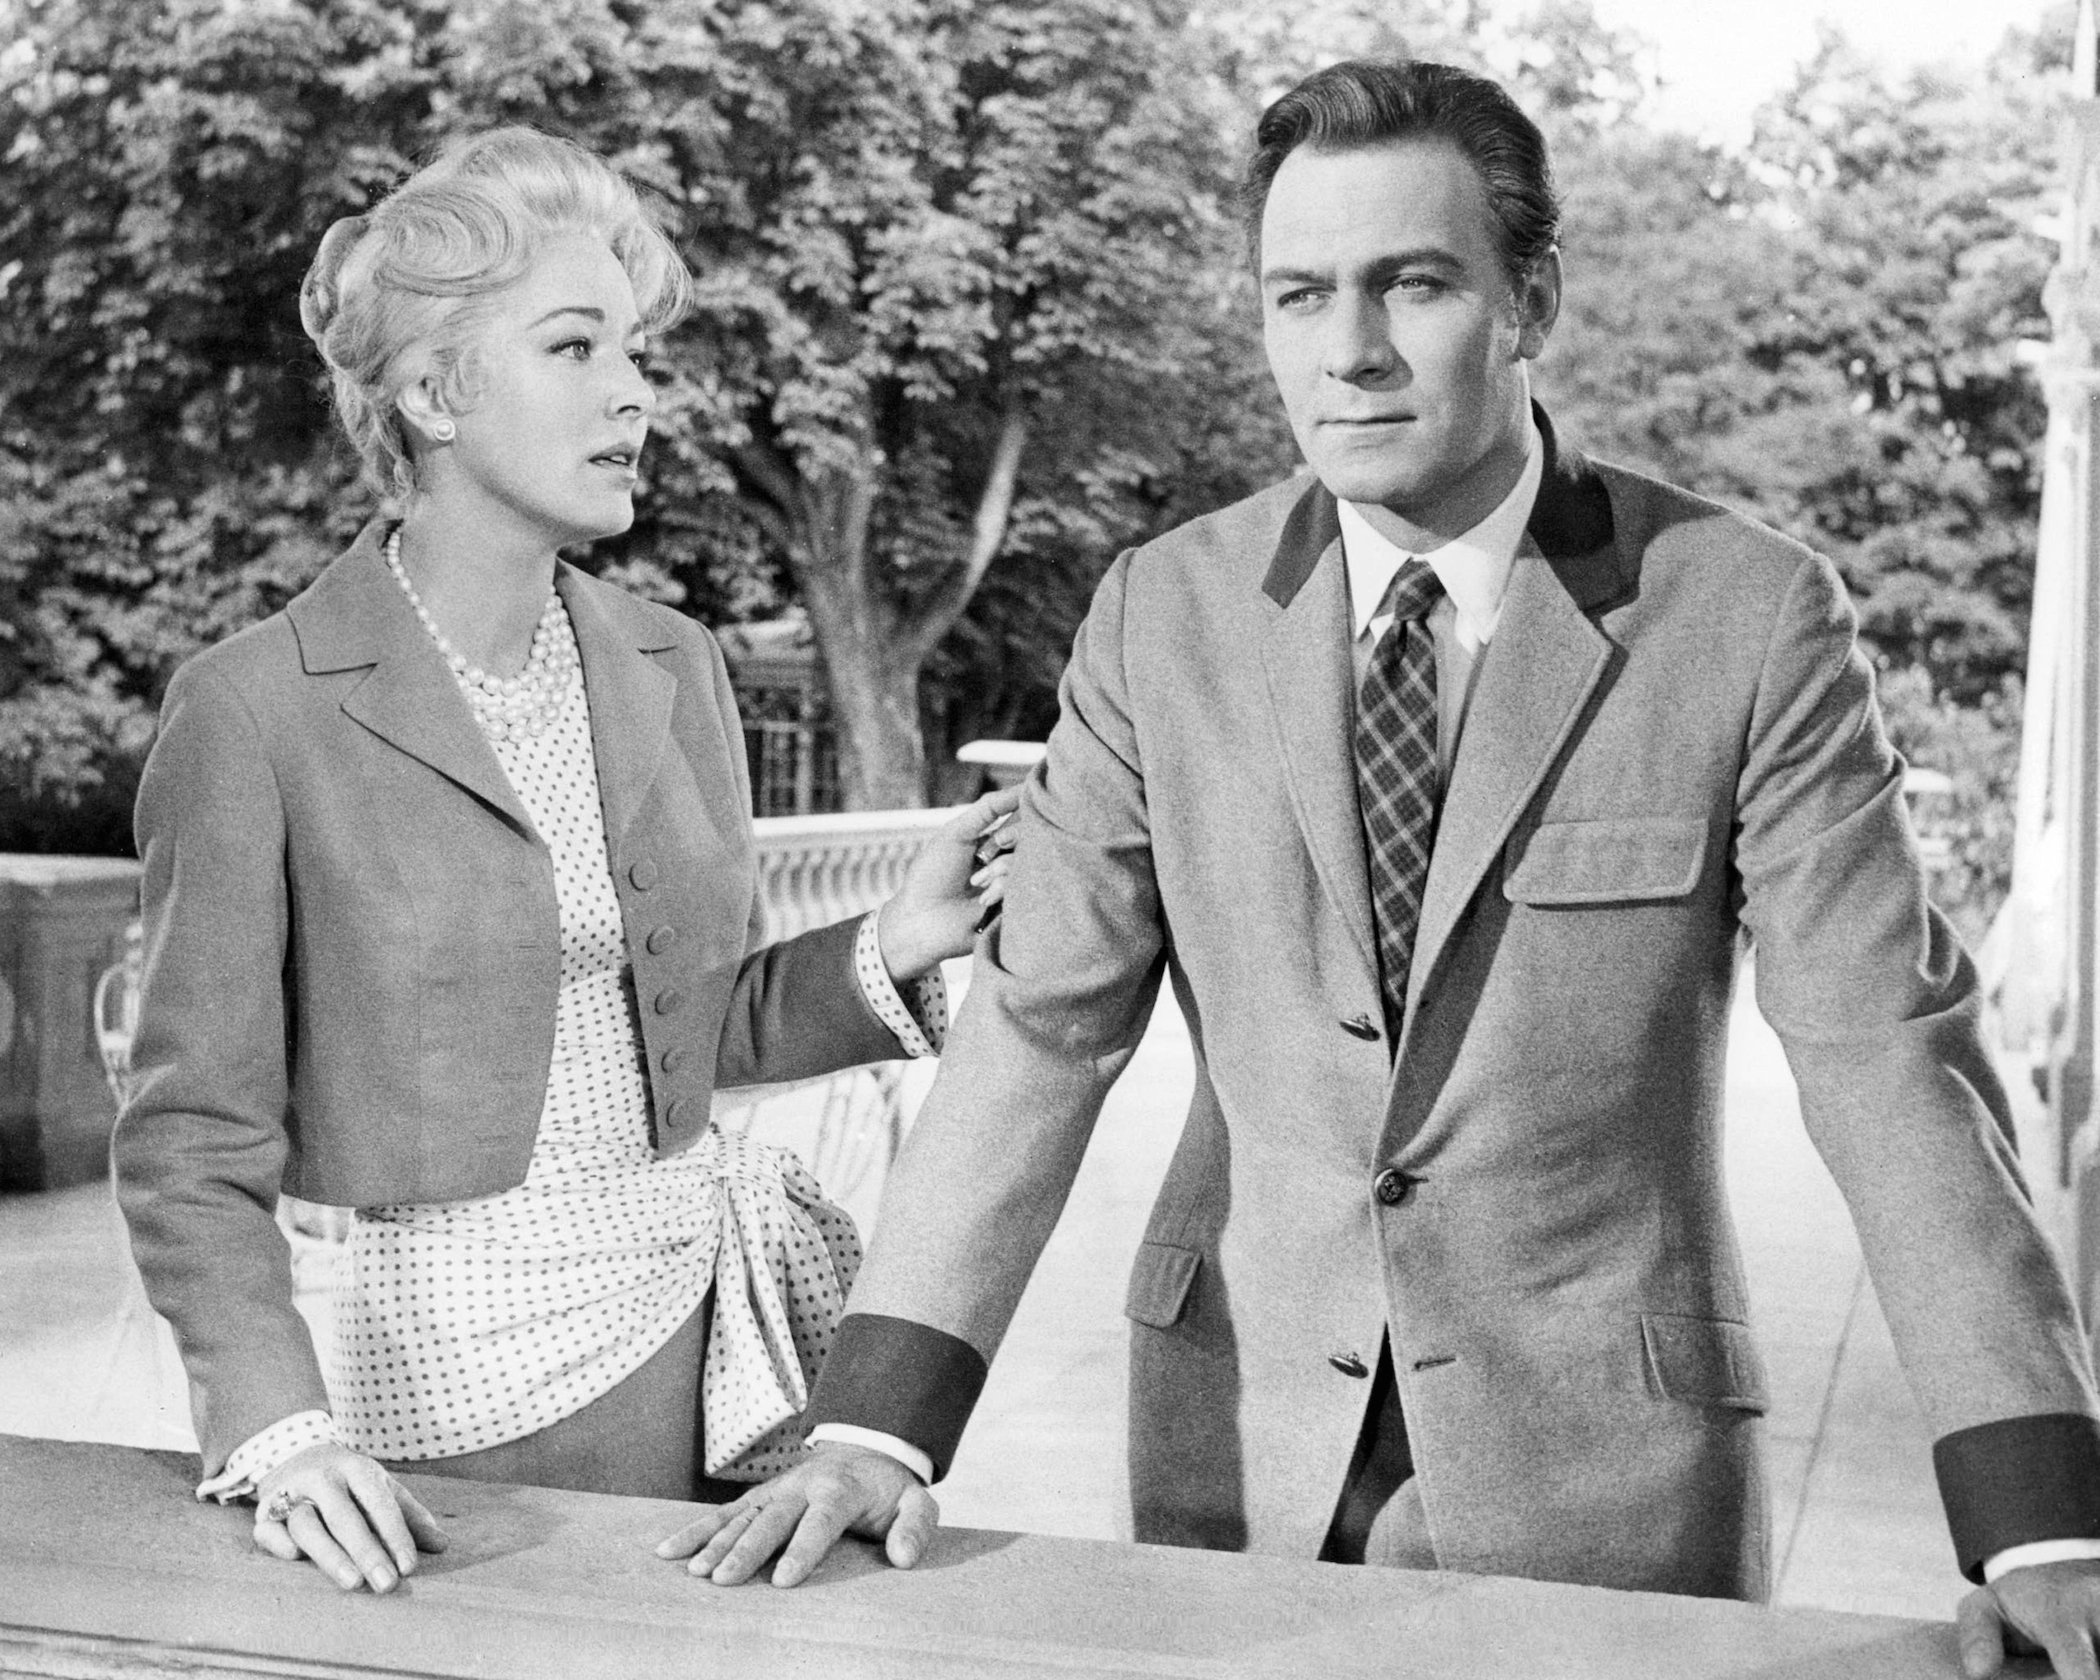 Christopher Plummer as Captain Von Trapp and Eleanor Parker as The Baroness in the musical film 'The Sound of Music' 